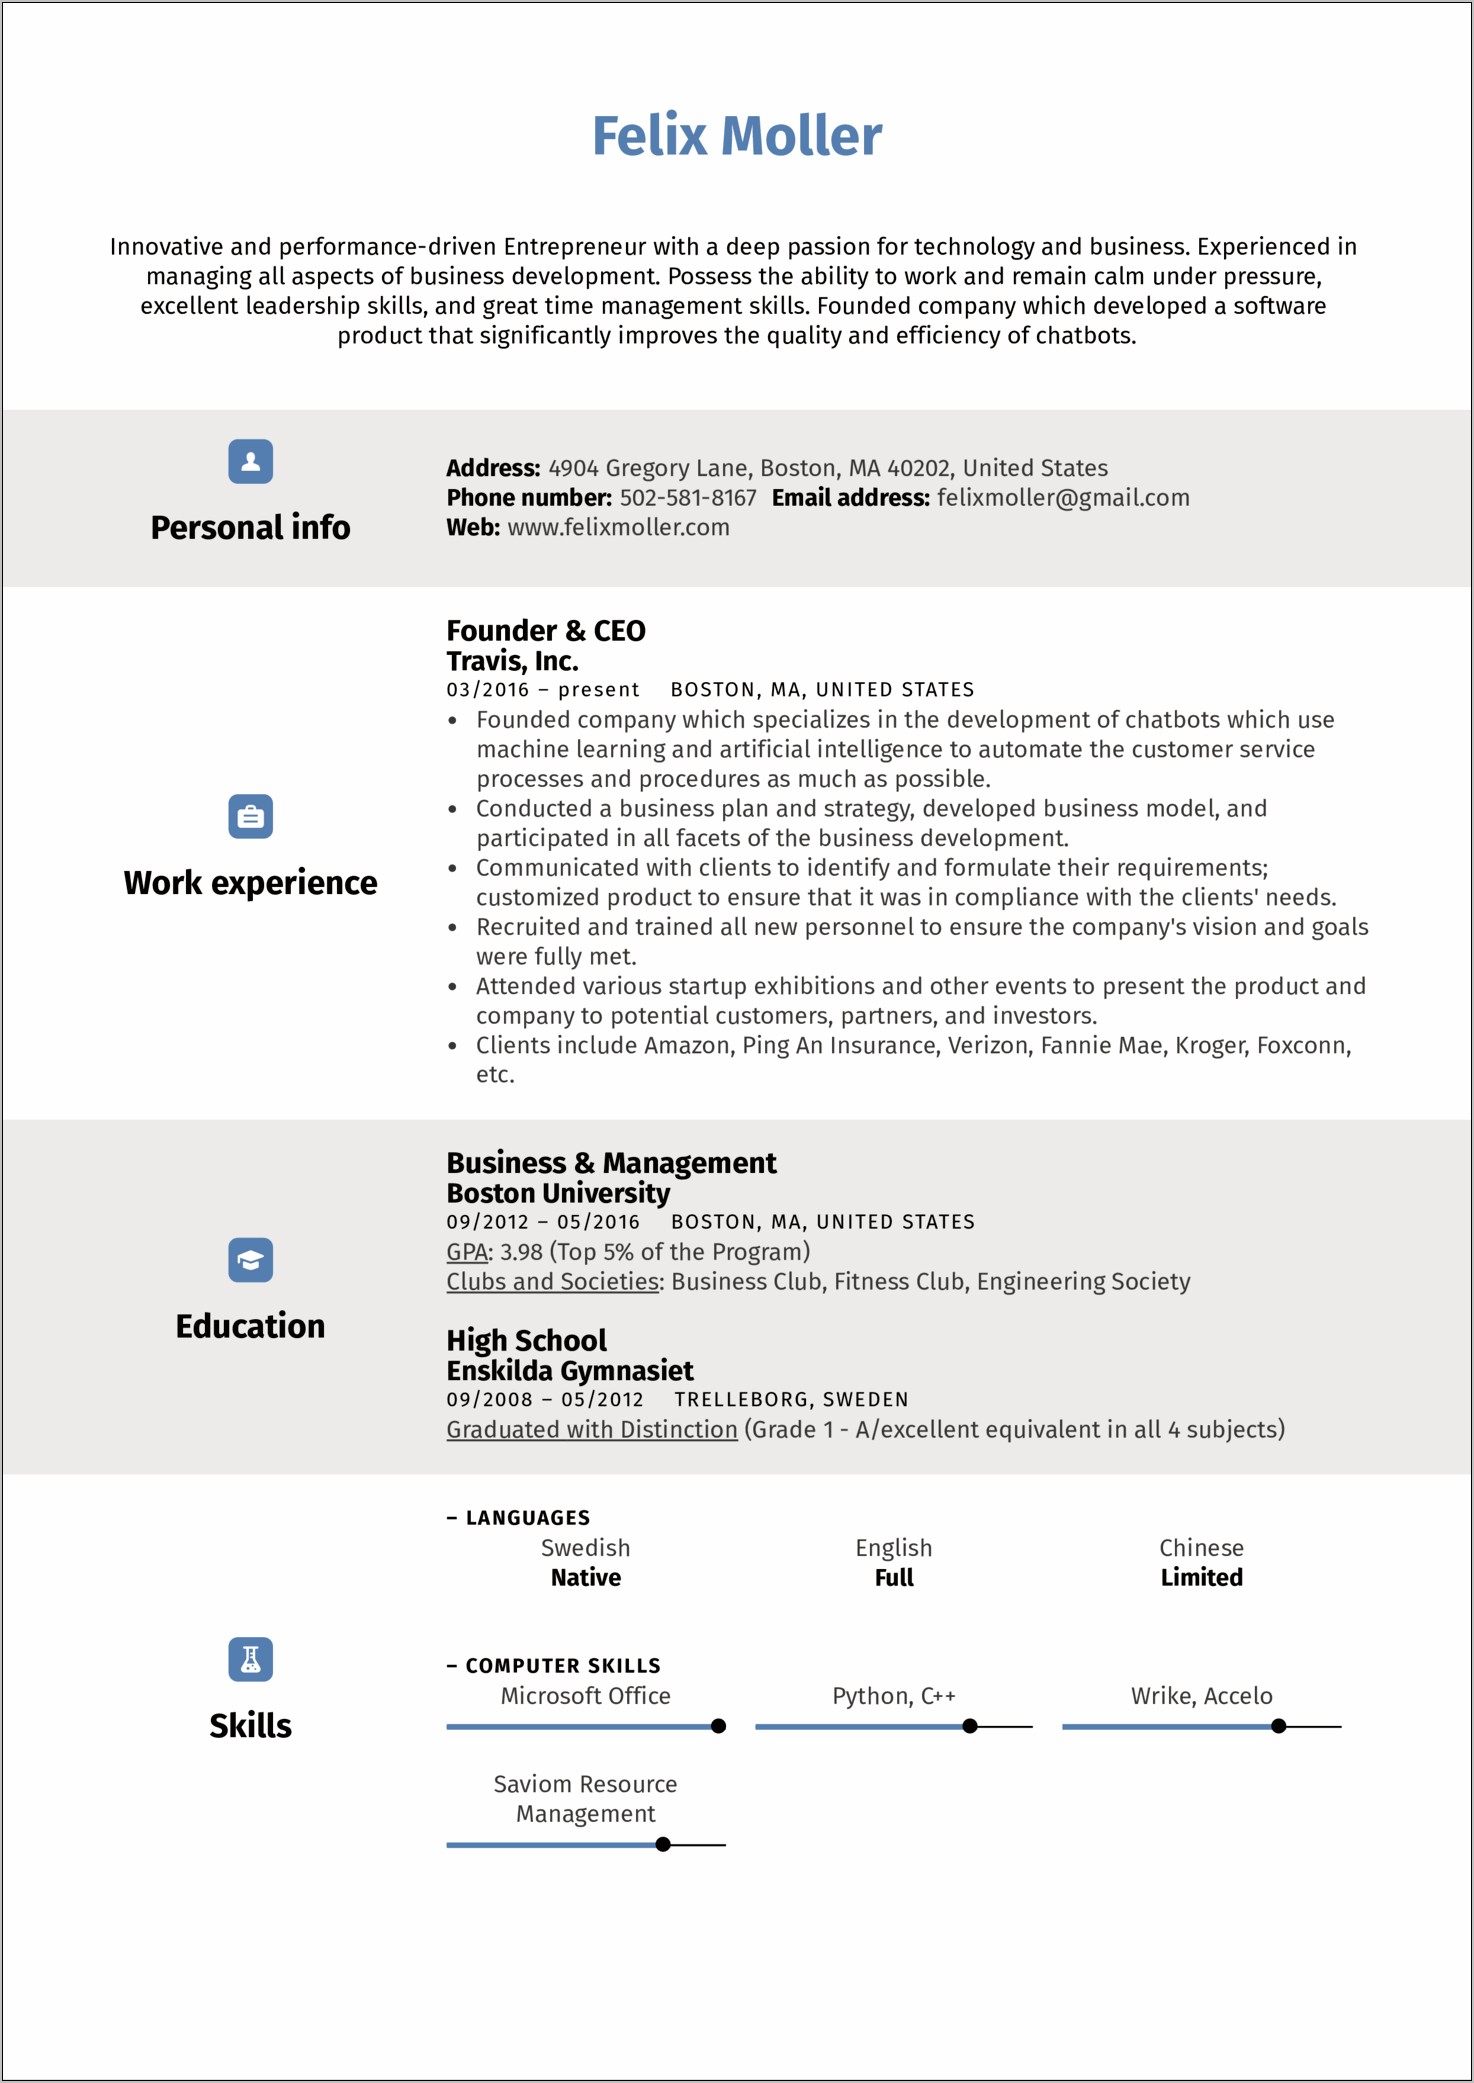 Exceptional Ability In Ms Office Example Resume